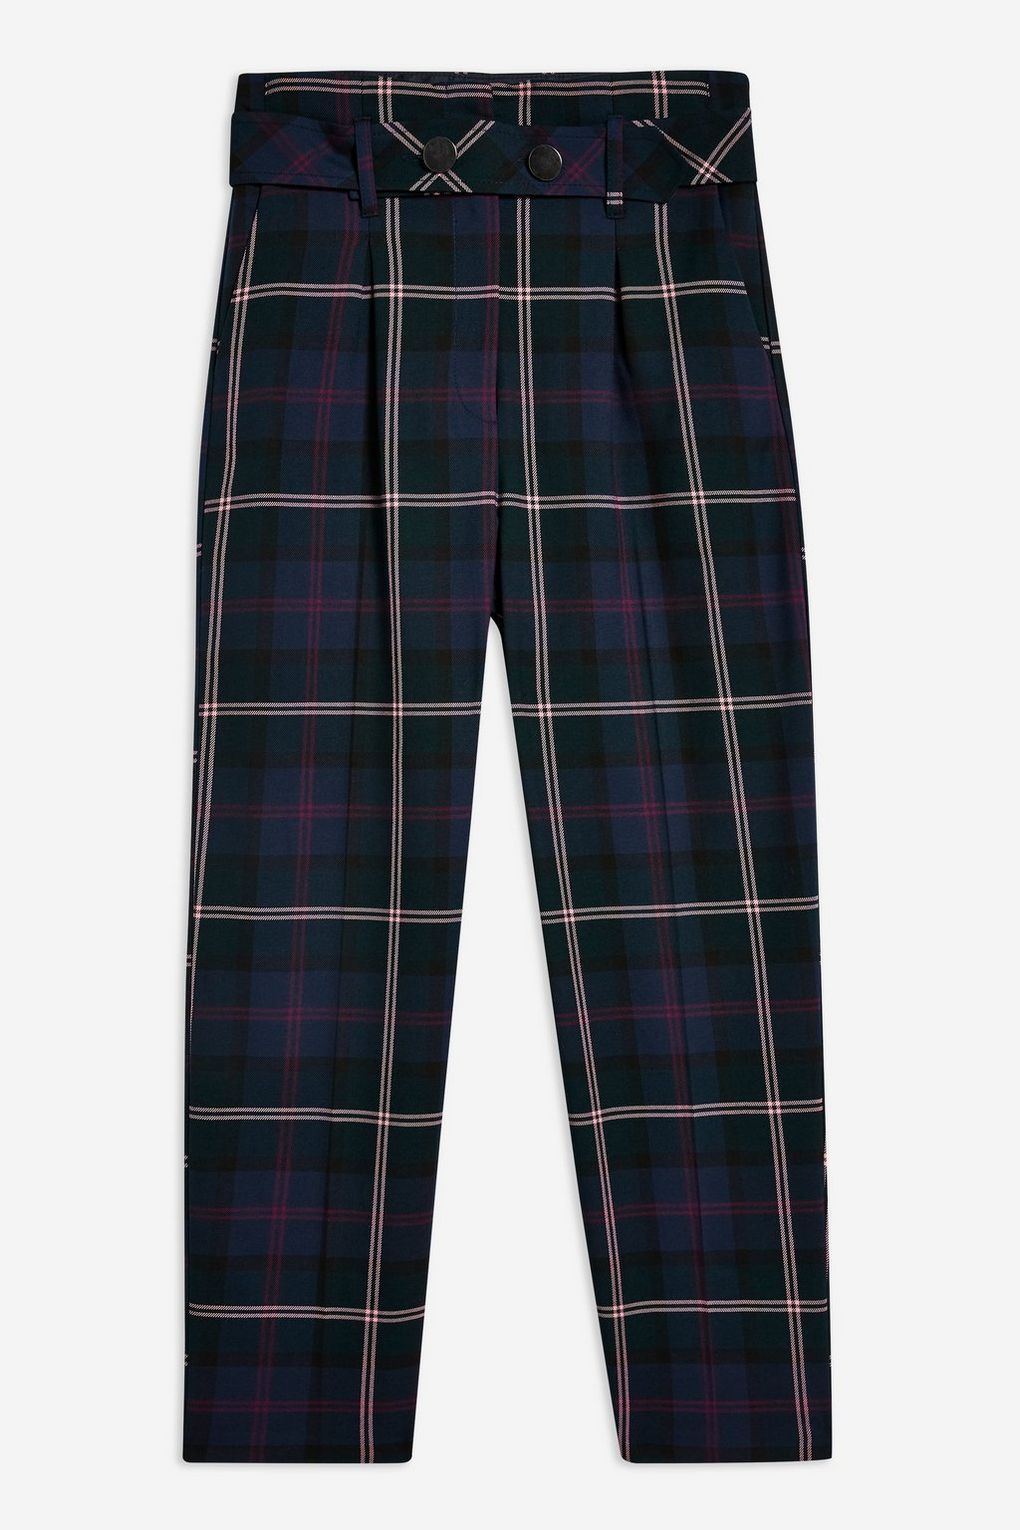 Topshop pink check tapered trousers in petite Never  Depop